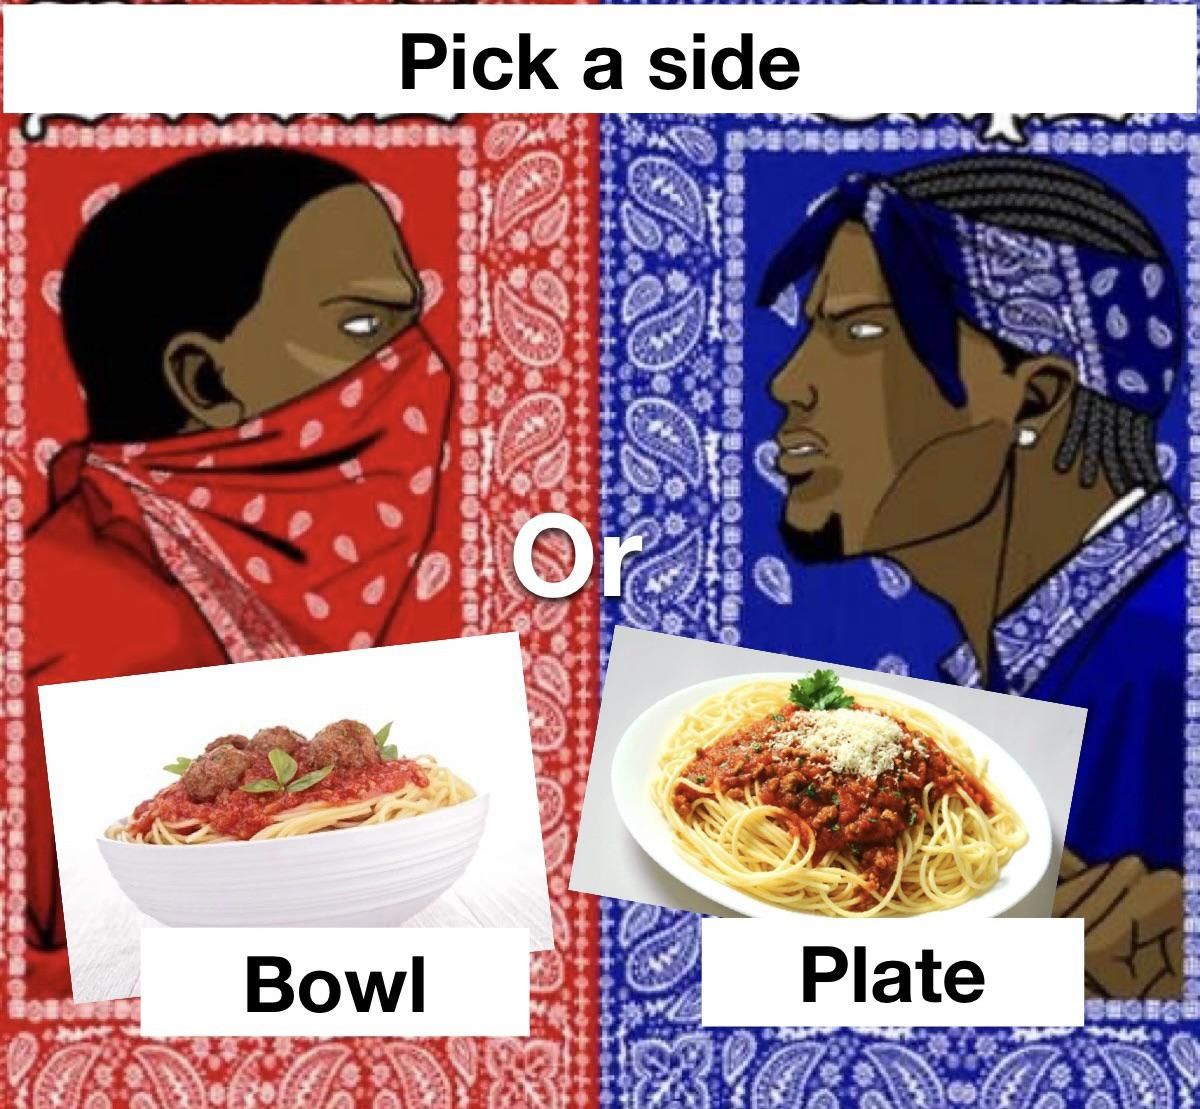 The bowl is the superior vessel for spaghetti